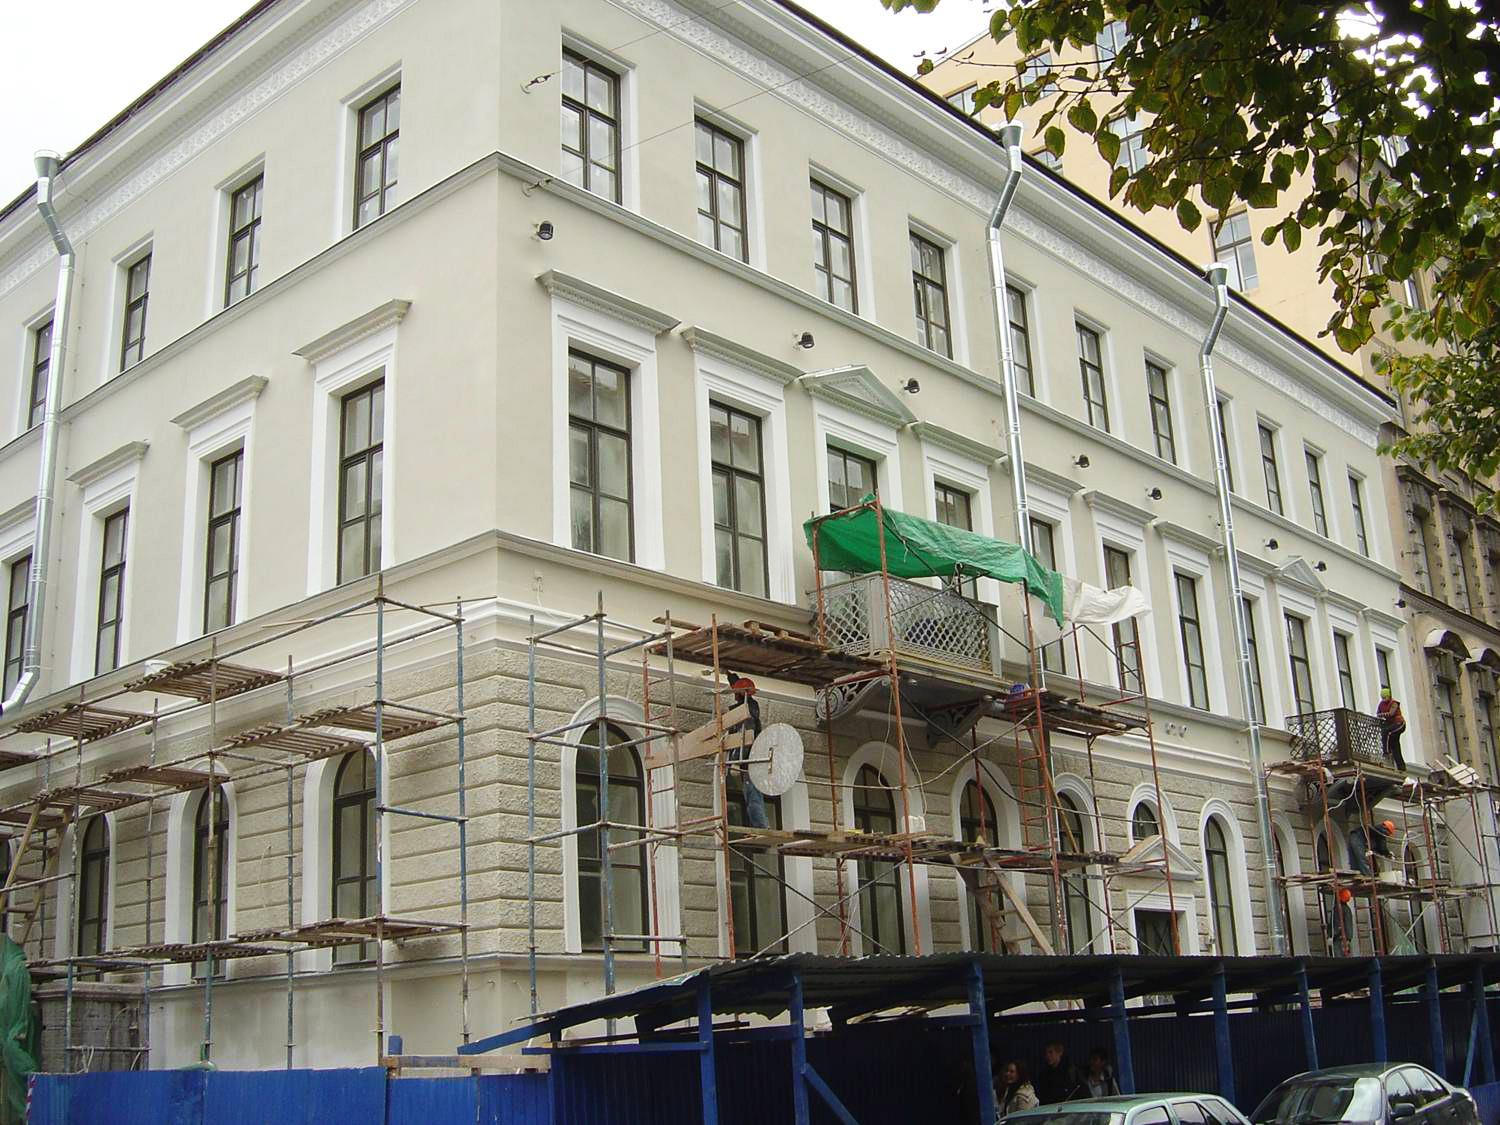 The St. Petersburg Institute in Finland is closing, it is borrowing "out" operating conditions